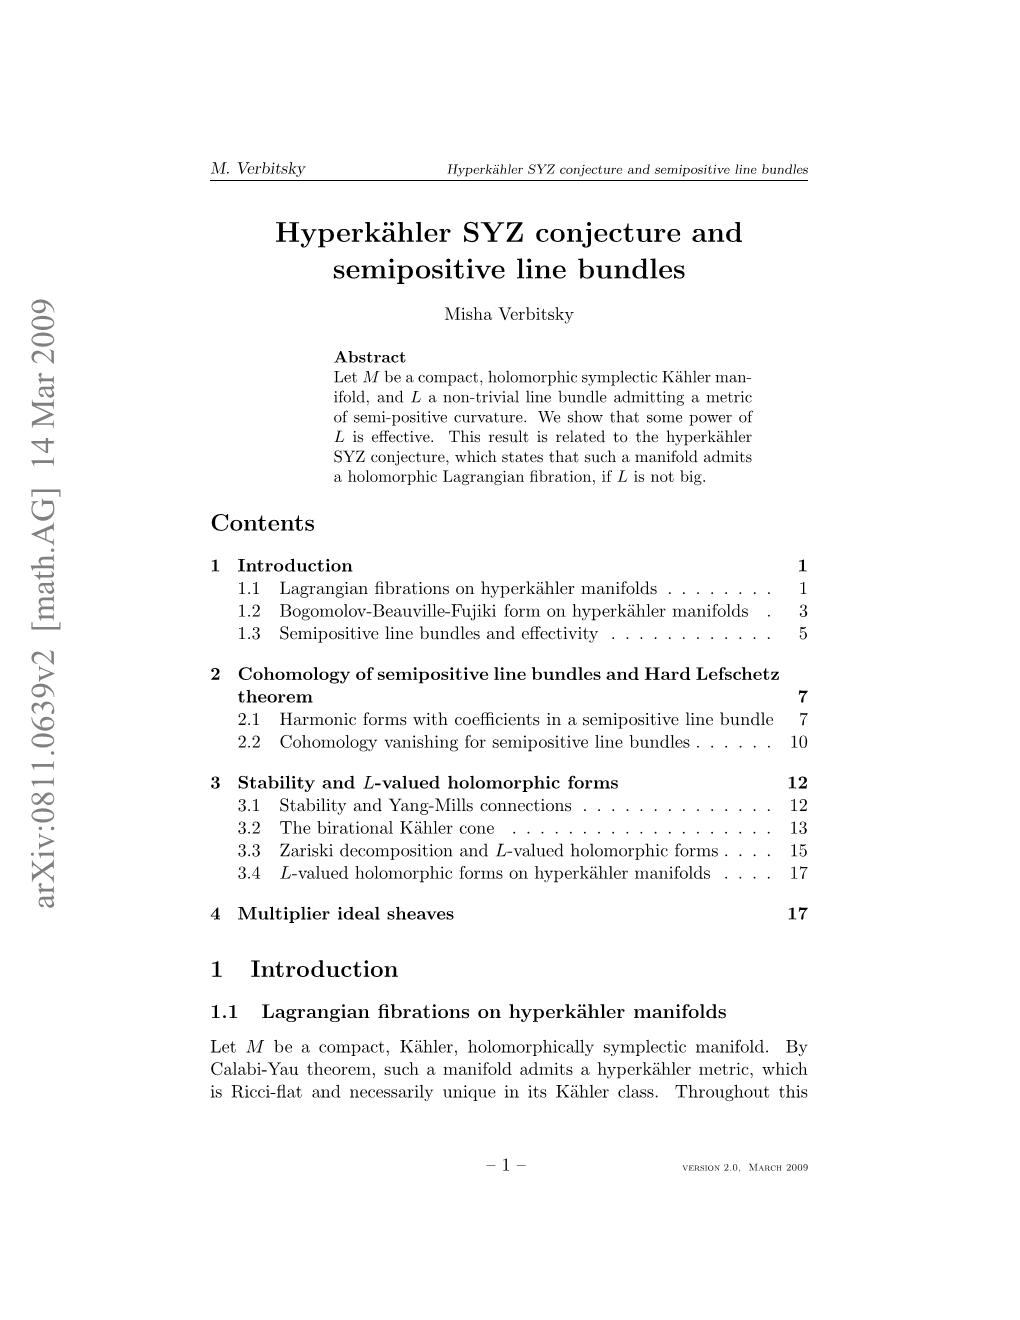 Hyperkahler SYZ Conjecture and Semipositive Line Bundles